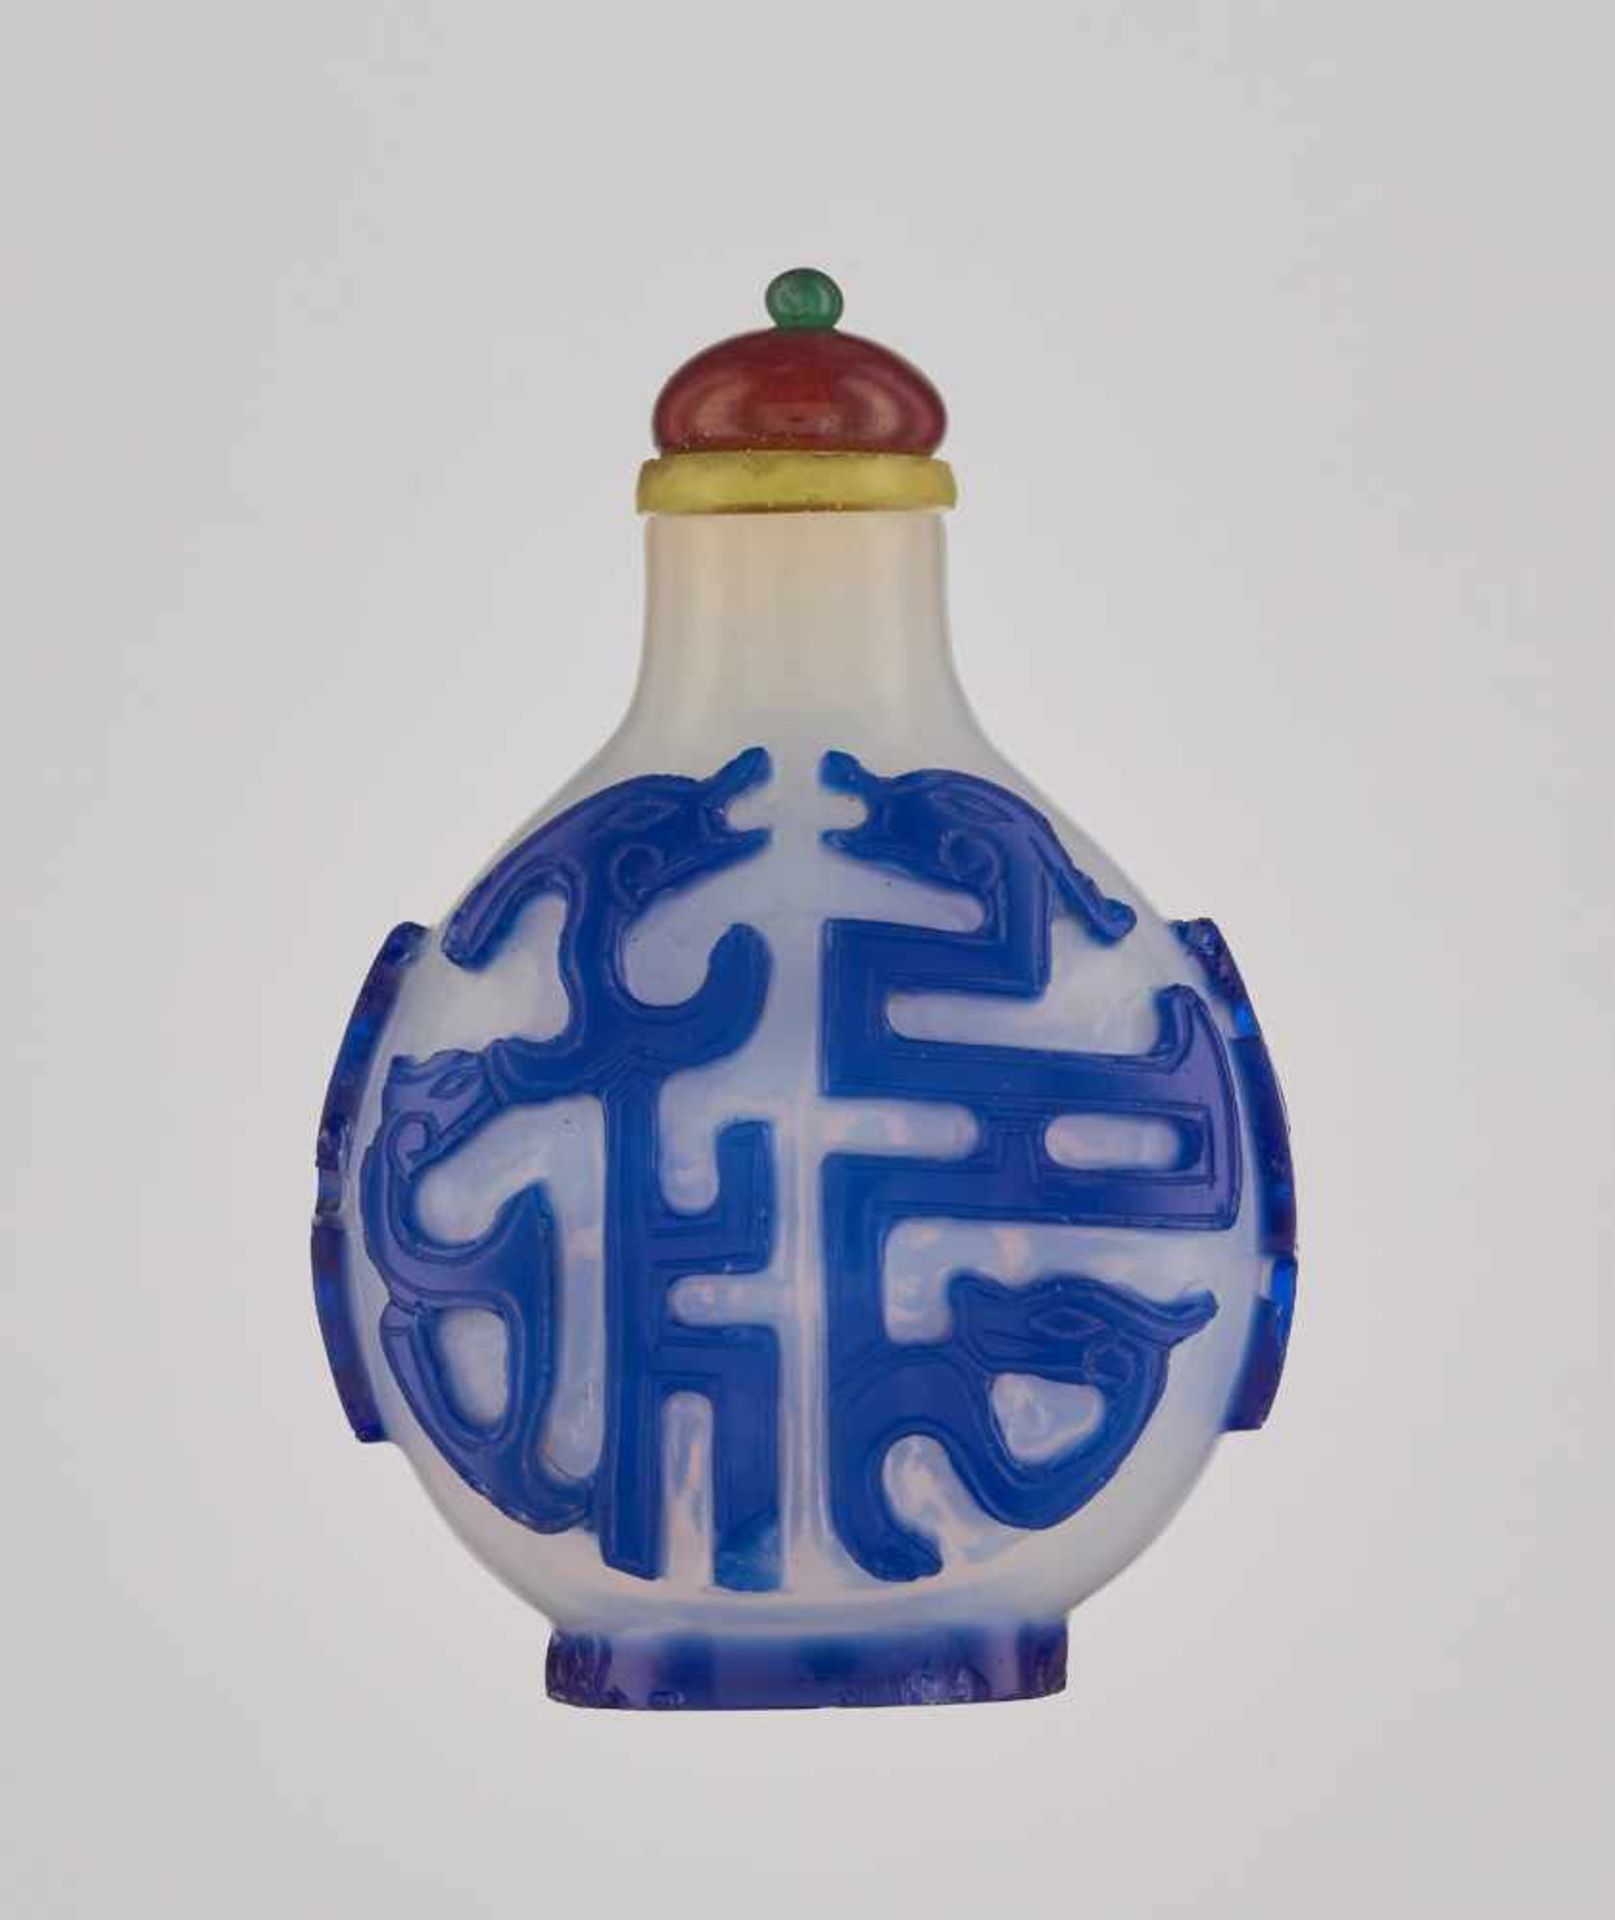 A SAPPHIRE-BLUE ON MILKY-WHITE OVERLAY ‘KUILONG’ GLASS SNUFF BOTTLE Glass, with incised overlay